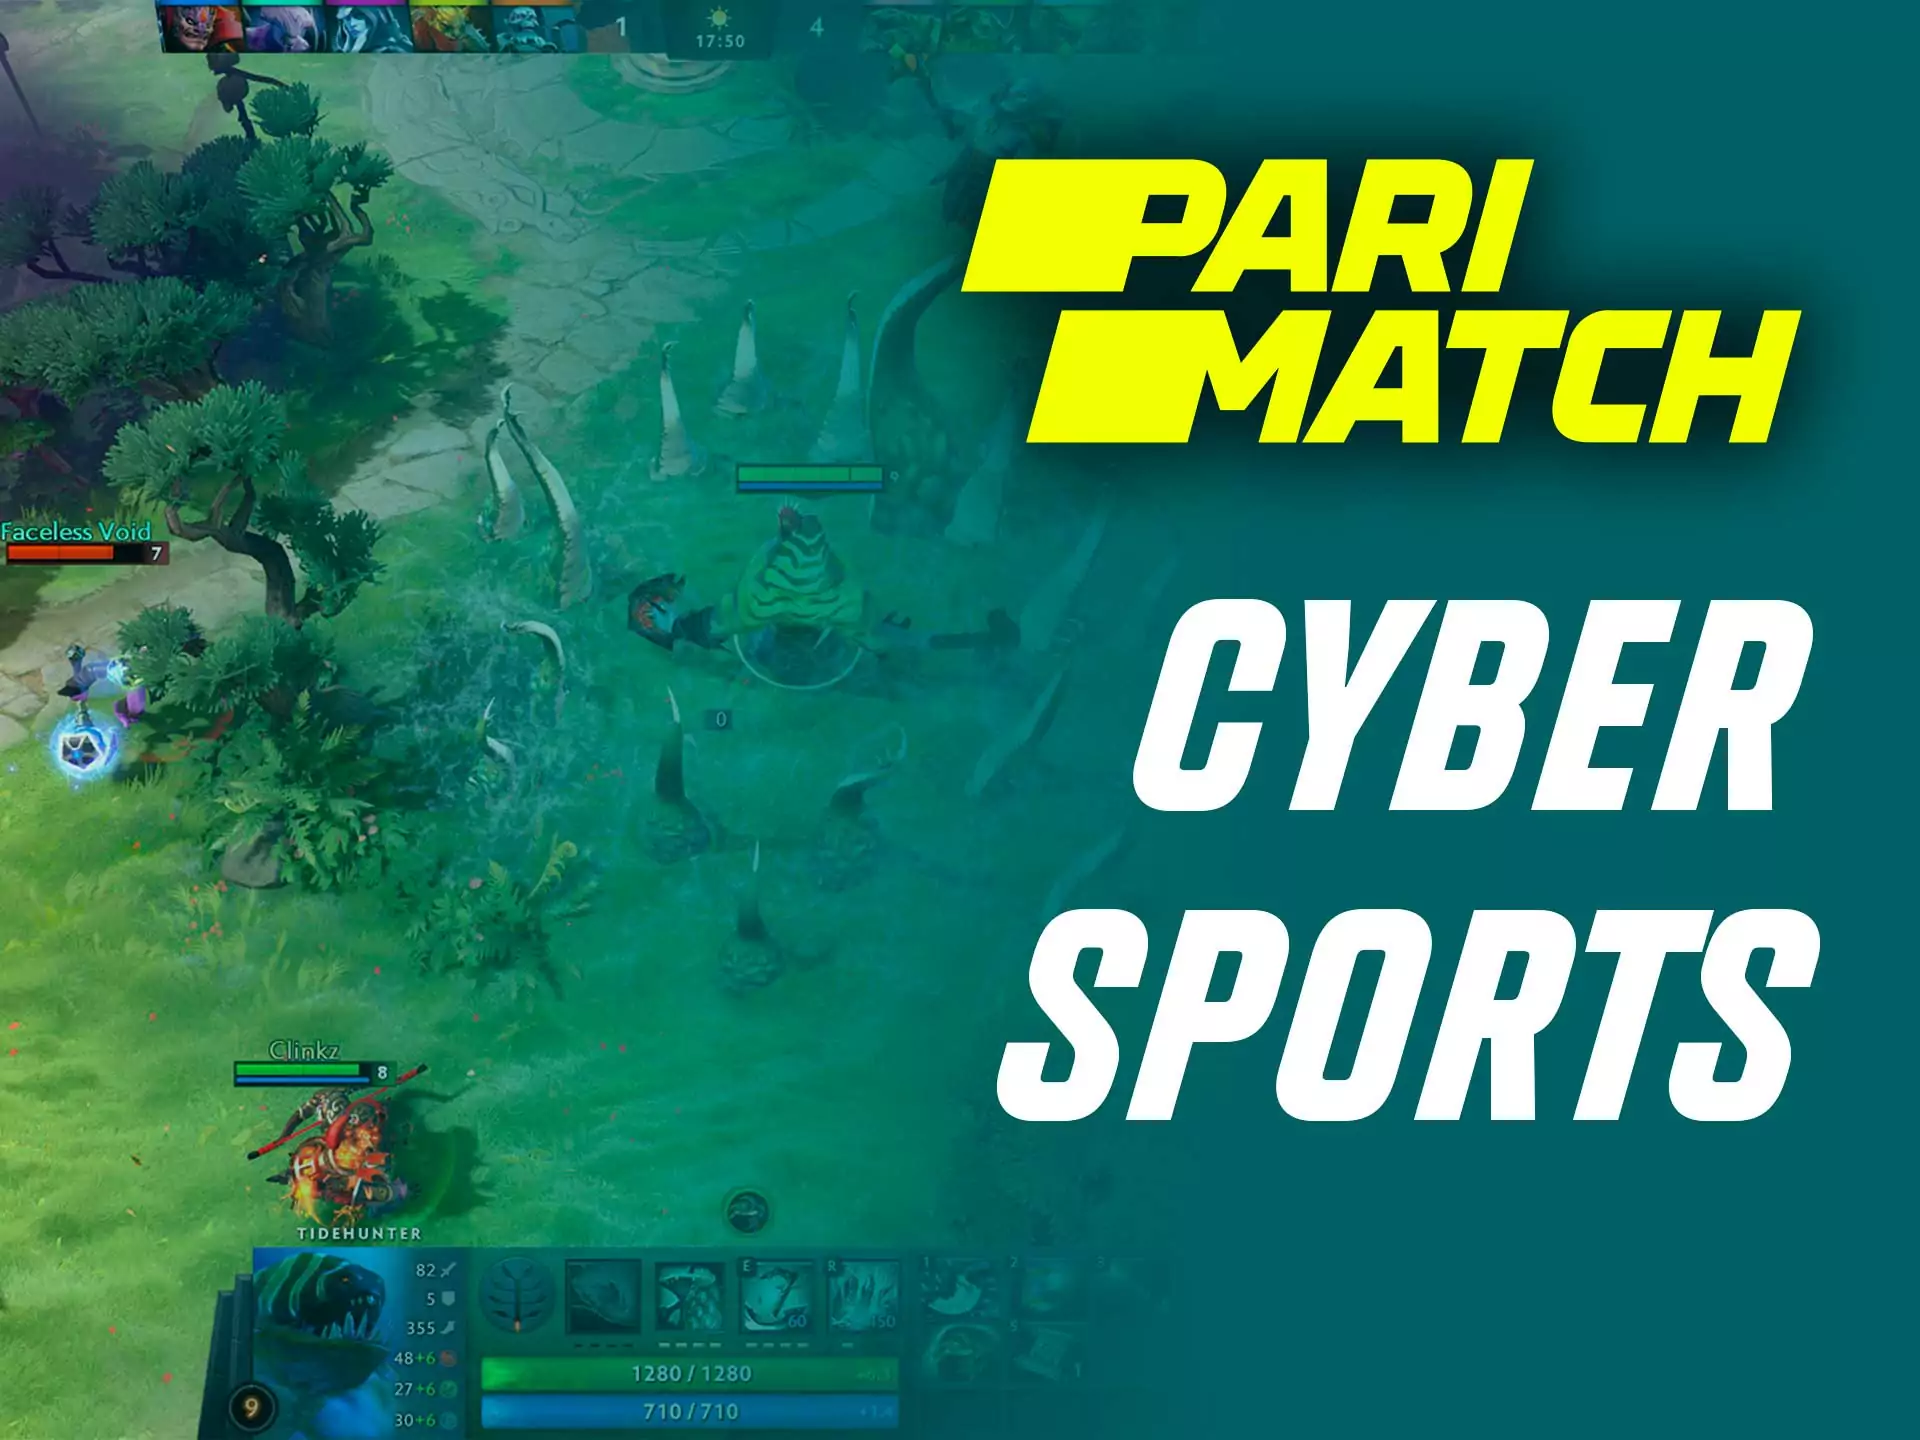 You can also place bets on you favorite cybersports team.